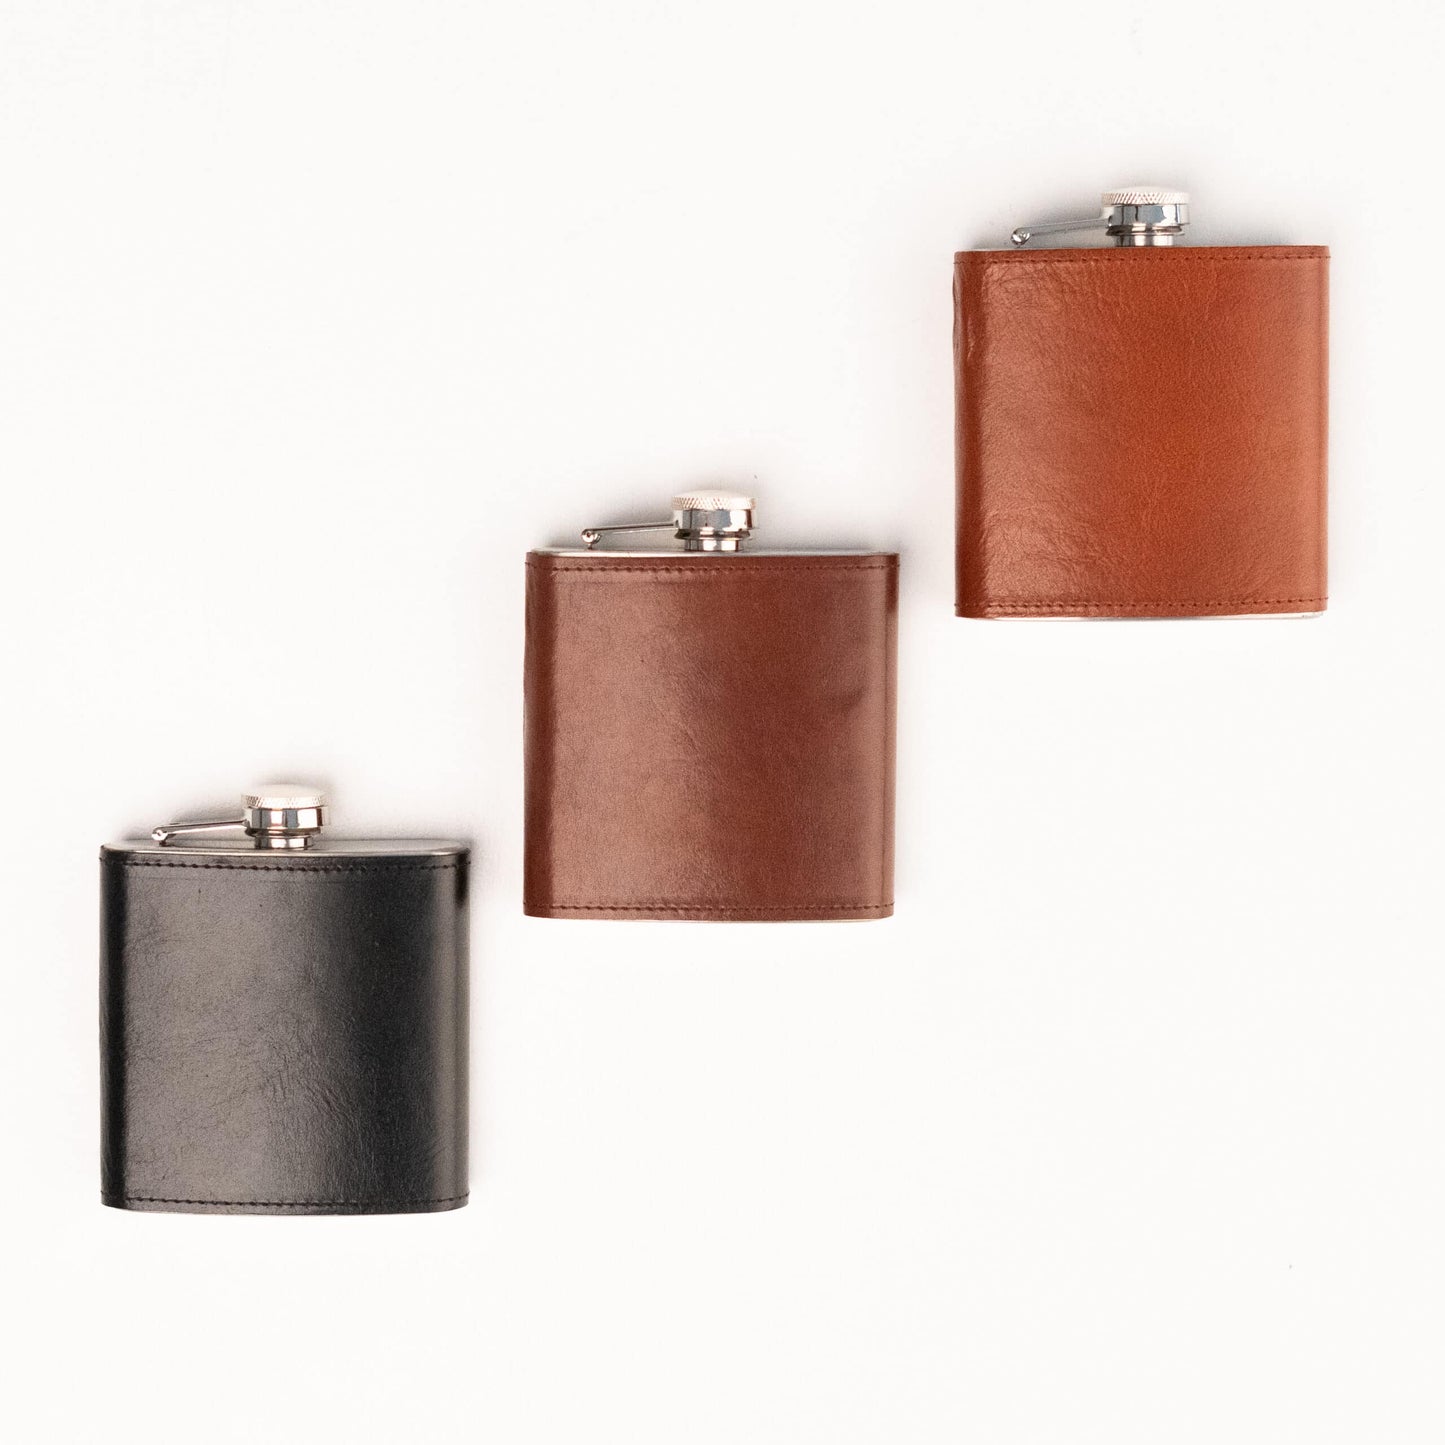 Hip Leather-Covered Flask: A group of stylish flasks, including a brown leather flask with a metal flask and a black flask with a silver top. Elevate your drinking experience with this European-made work of art, crafted from stainless steel and luxurious natural leather. Compact and sophisticated, it holds 177ml of spirits. Perfect for any occasion, fill it with your preferred libation and stand out from the crowd. From Men In Style, your destination for exclusive men's accessories.